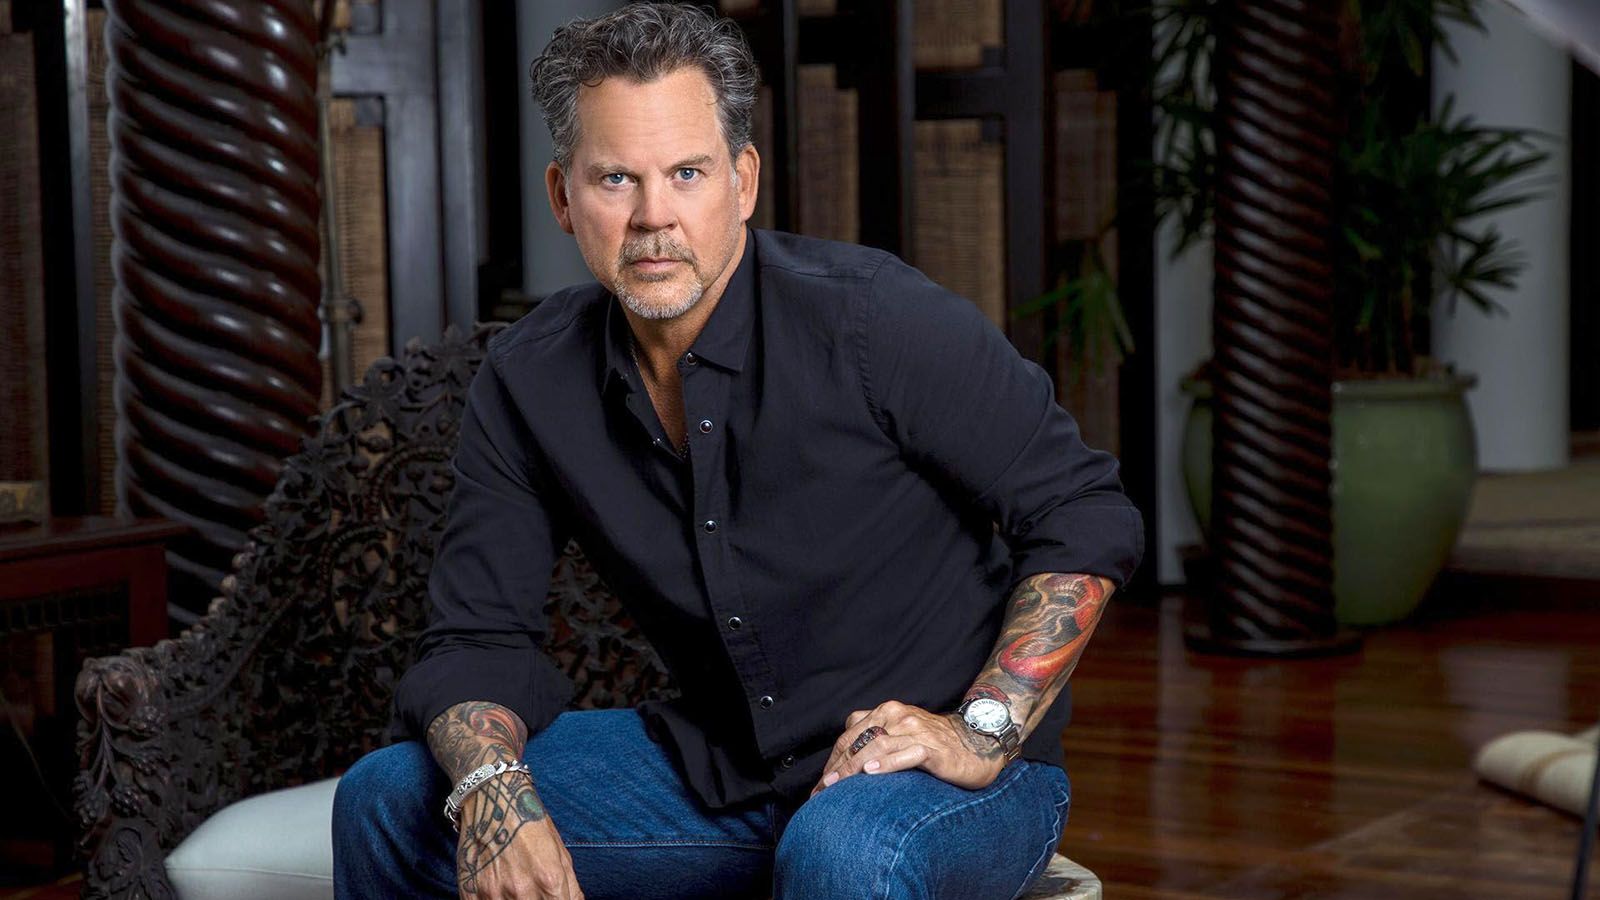 Gary Allan will bring his outlaw country style to Clyde Theatre on Feb. 9.